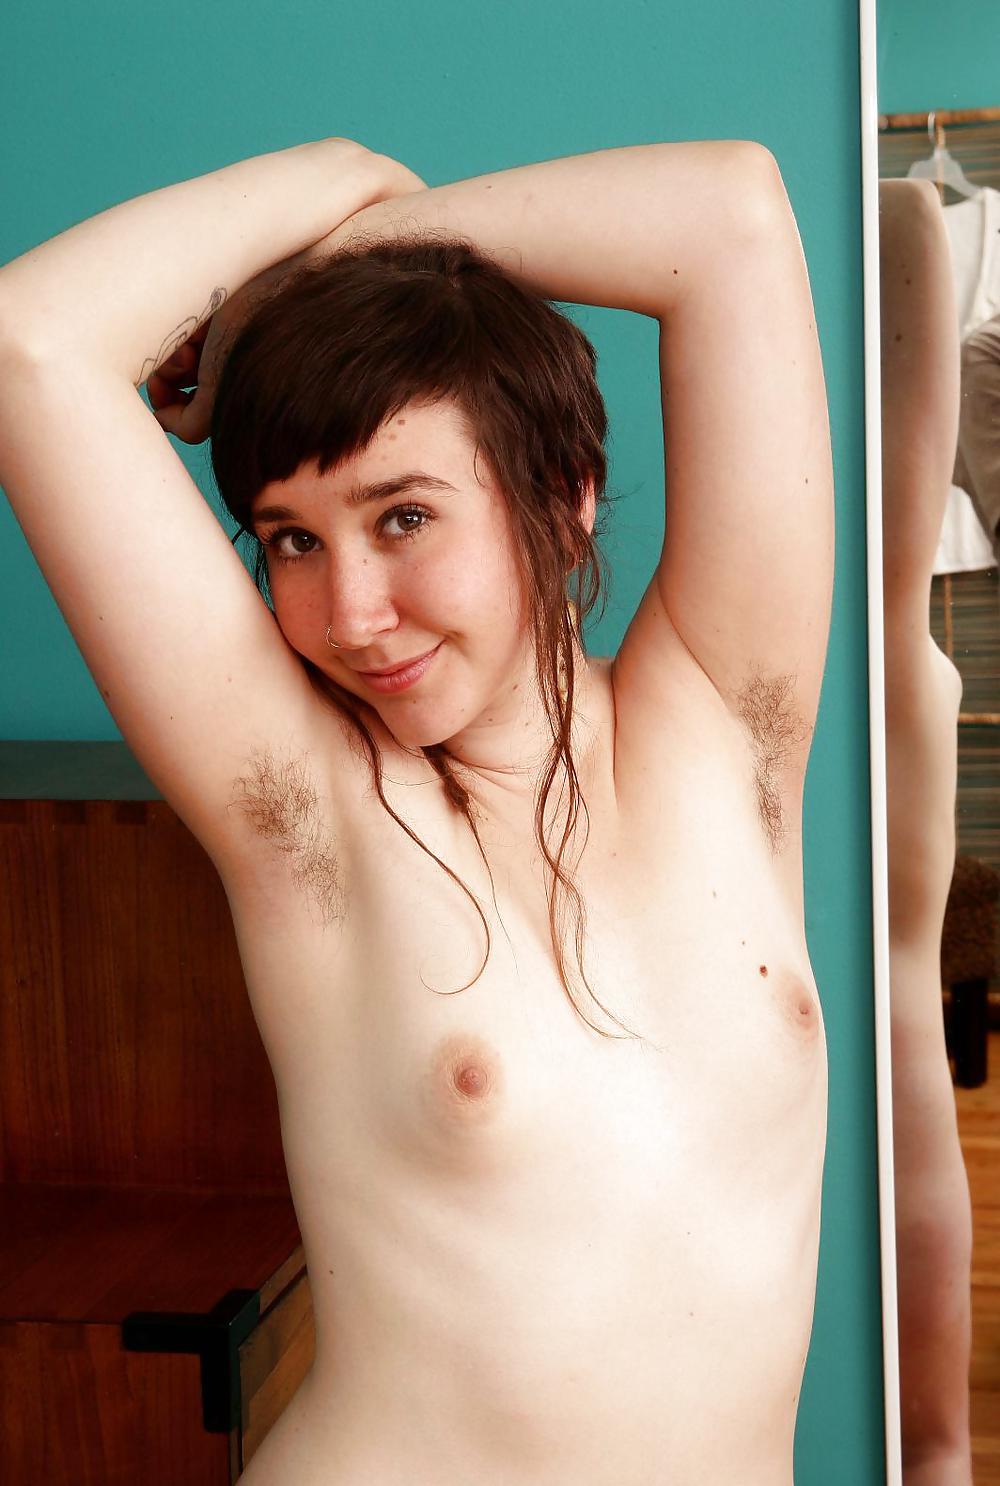 Girls with hairy, unshaven armpits U to Z #23683403